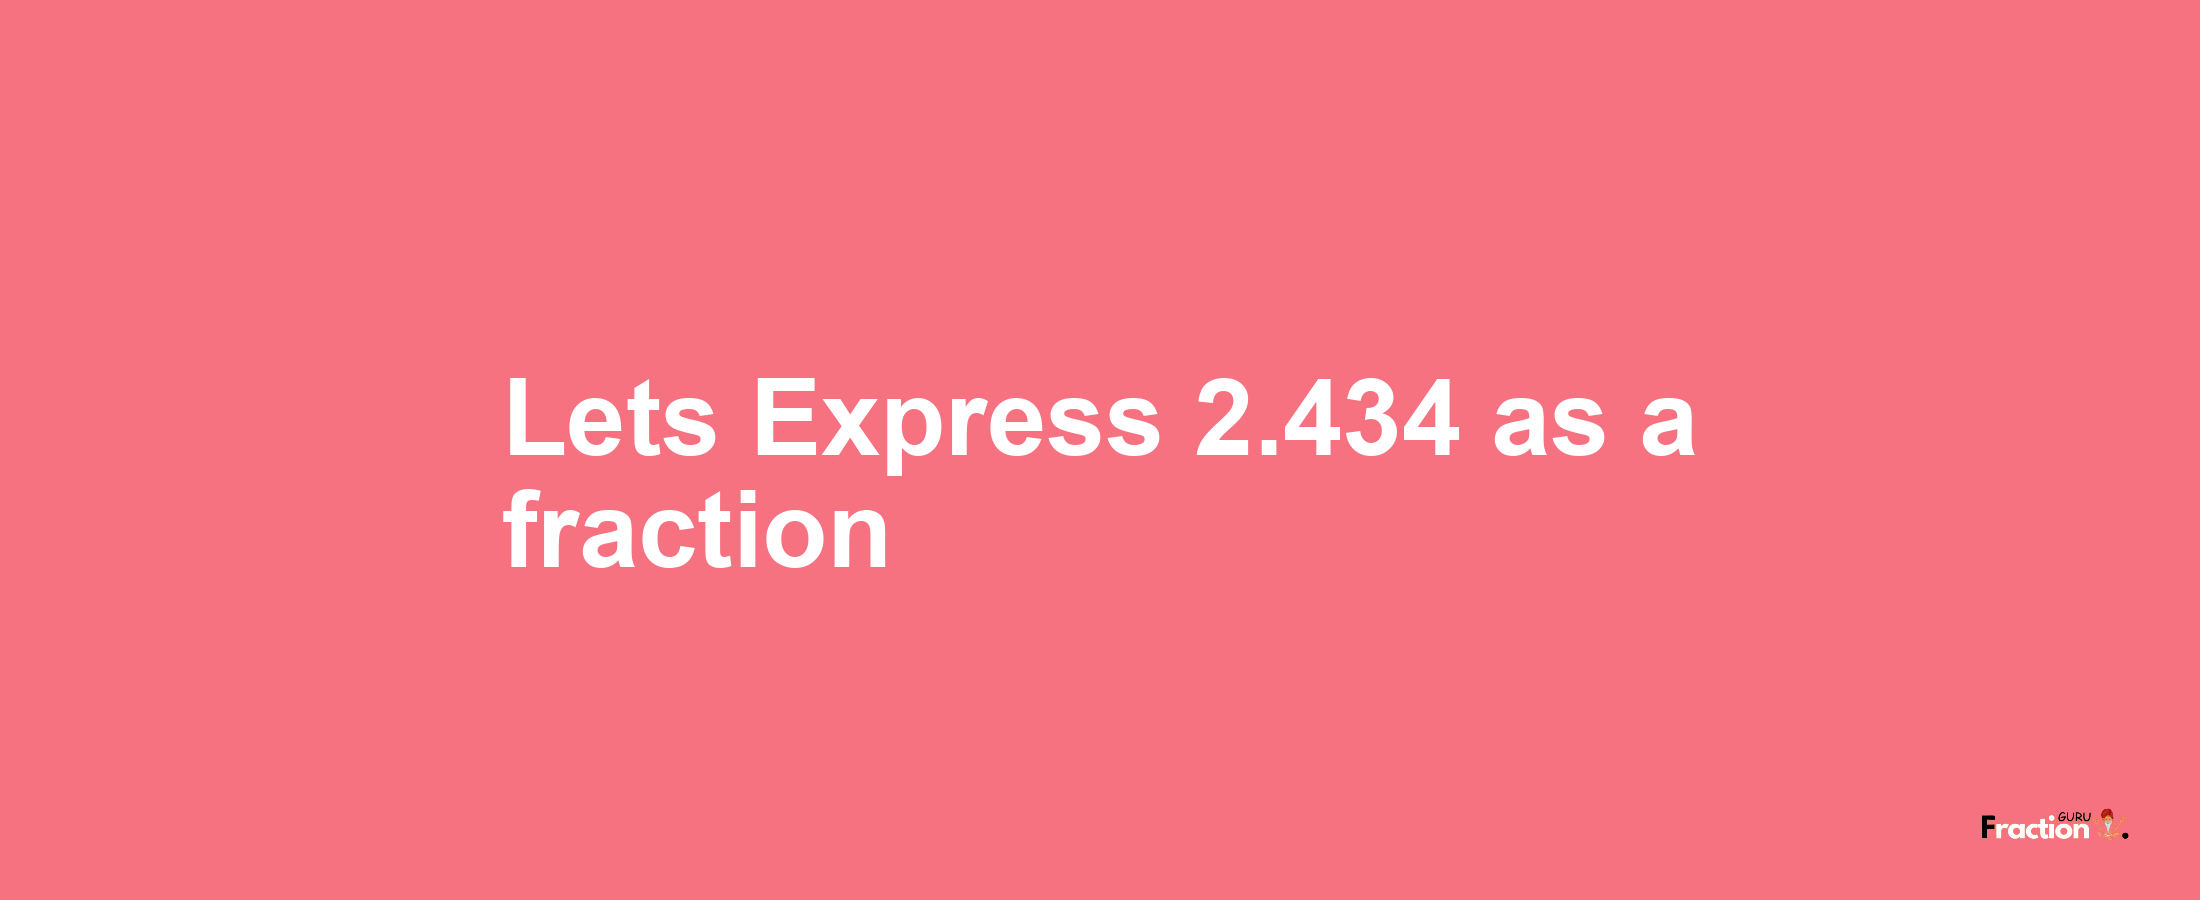 Lets Express 2.434 as afraction